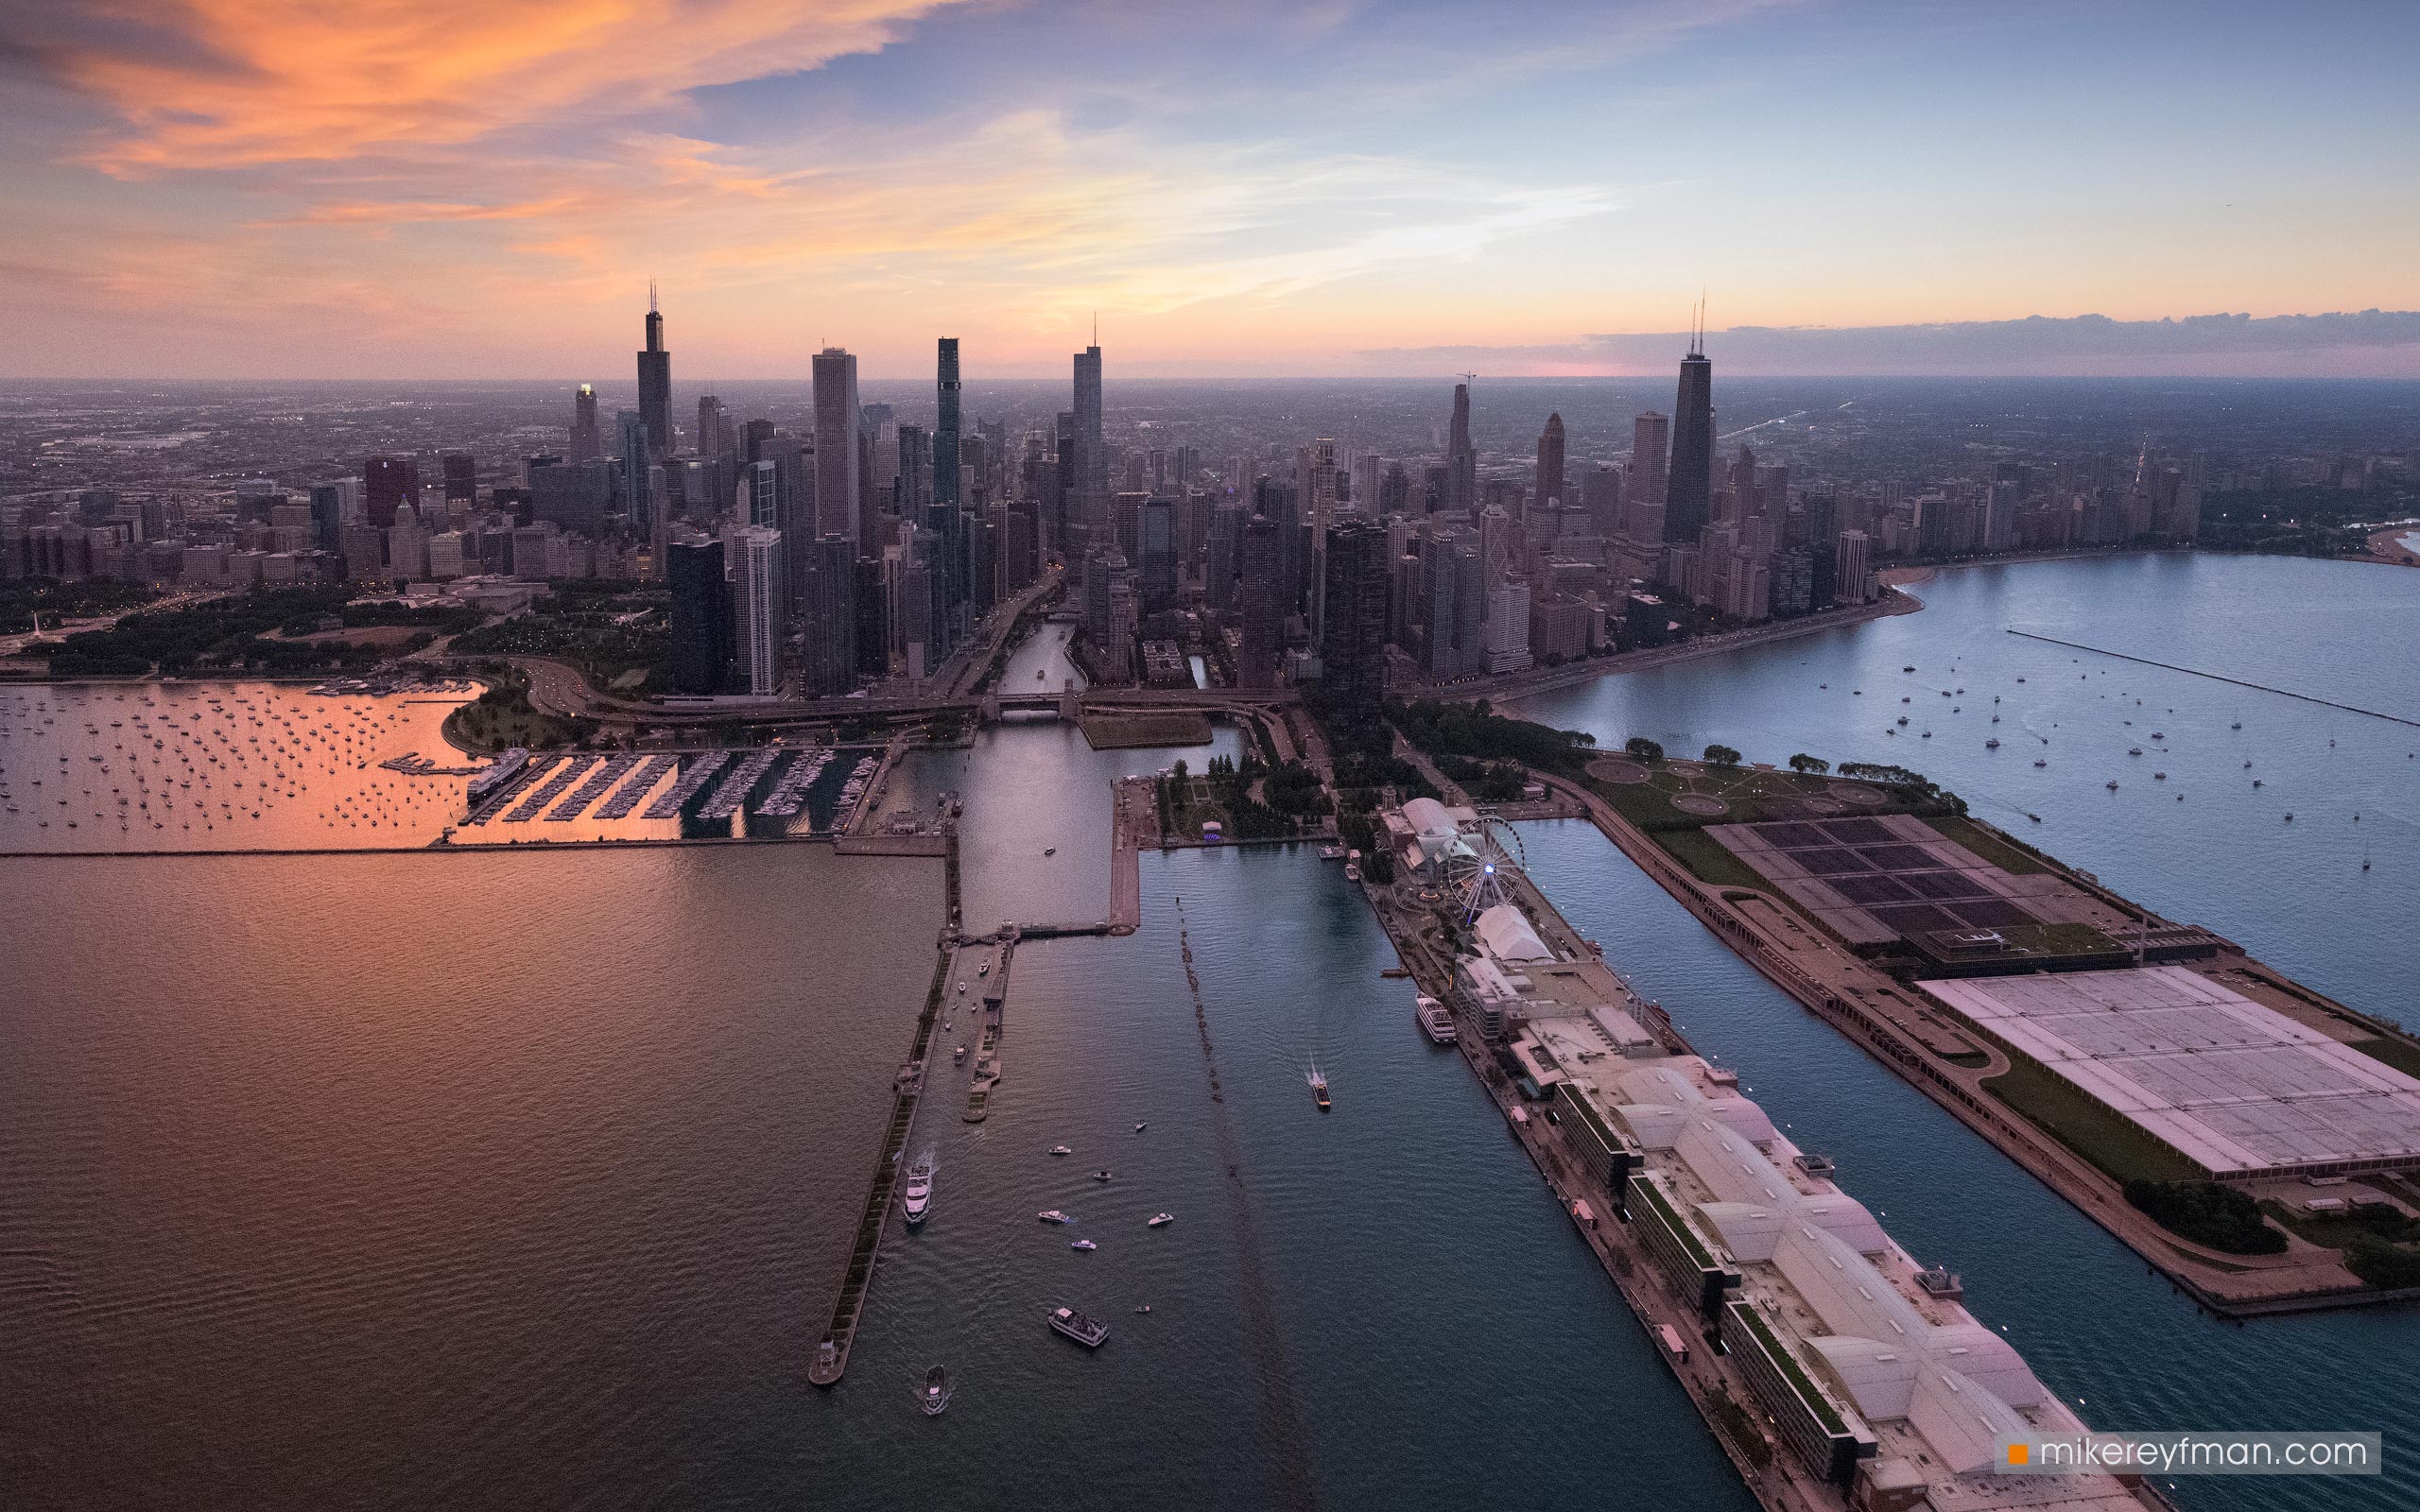 Aerial view of Chicago Skyline with Chicago Harbour and Navy Pier in the foreground. Chicago, Illinois, USA. 058-CH-2_50F1987 - Ever-beating architectural heart of America. The birthplace of the most iconic buildings in the country. - Mike Reyfman Photography